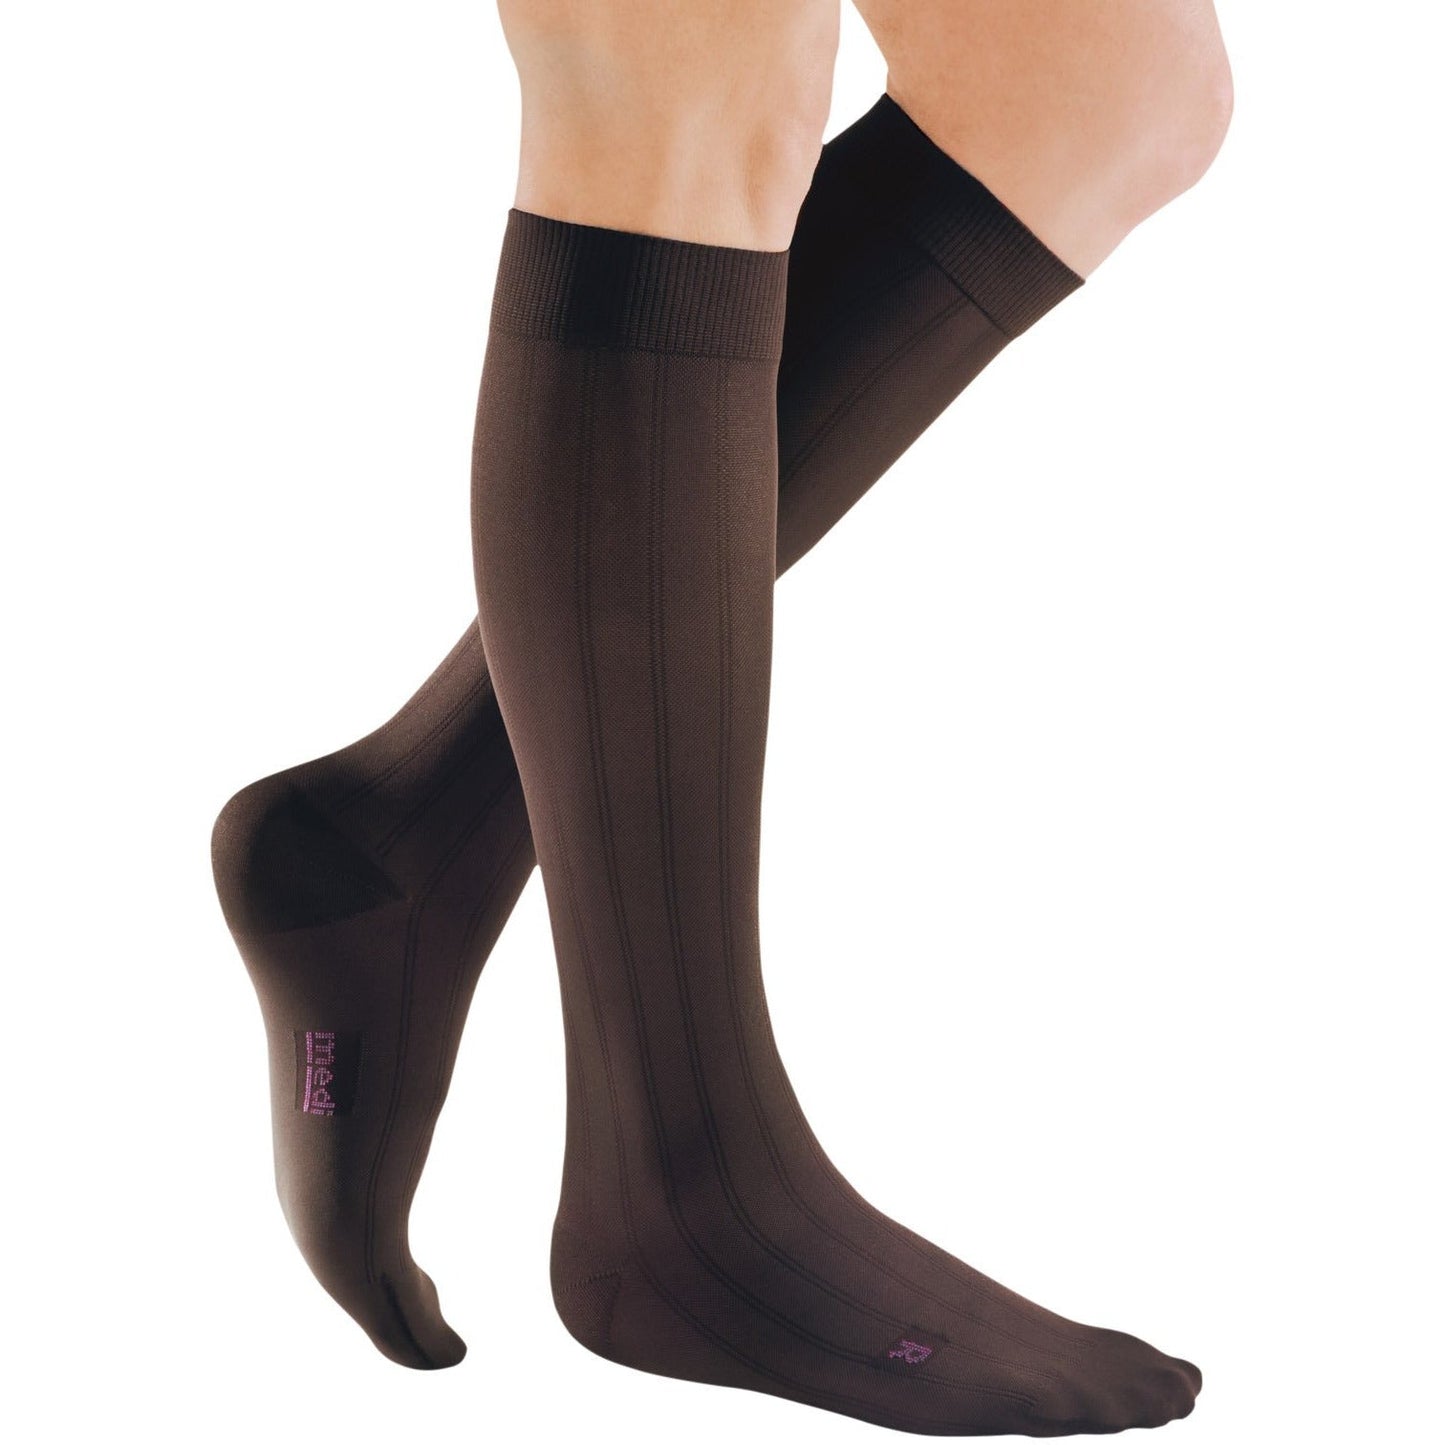 Mediven for Men Classic 20-30 mmHg Knee High, Extra Wide Calf, Brown